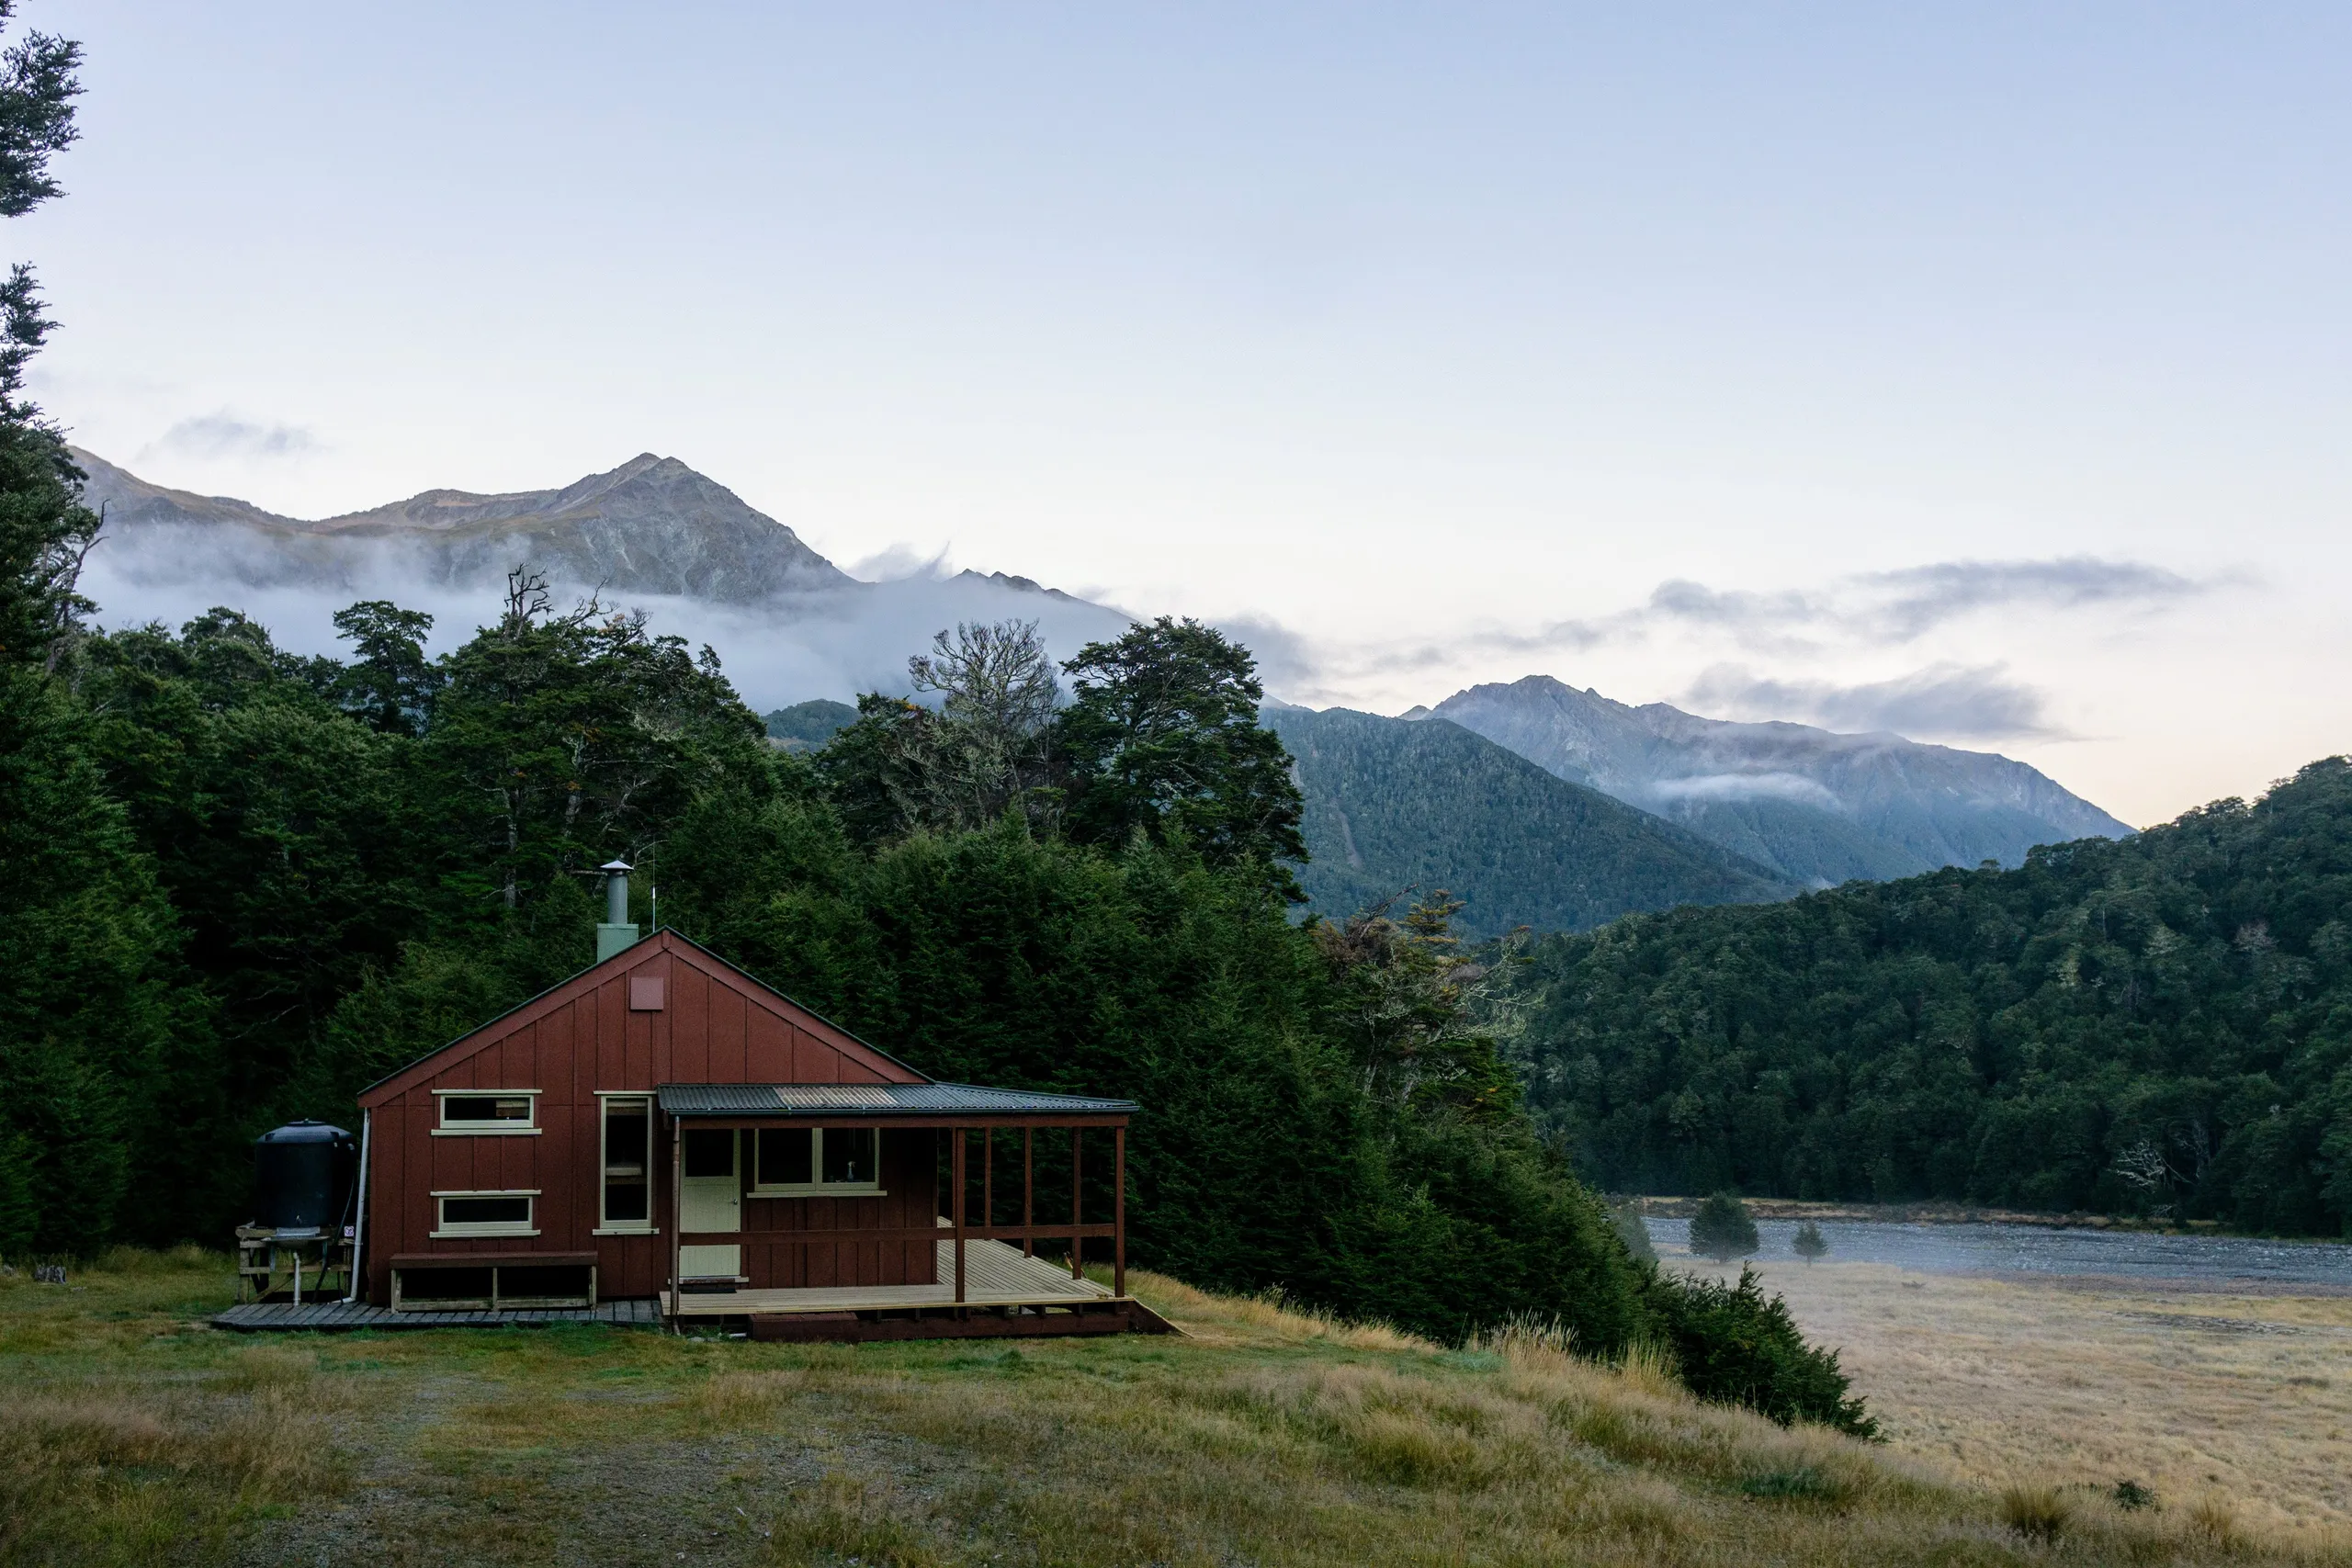 Hamilton Hut and its surroundings in the morning